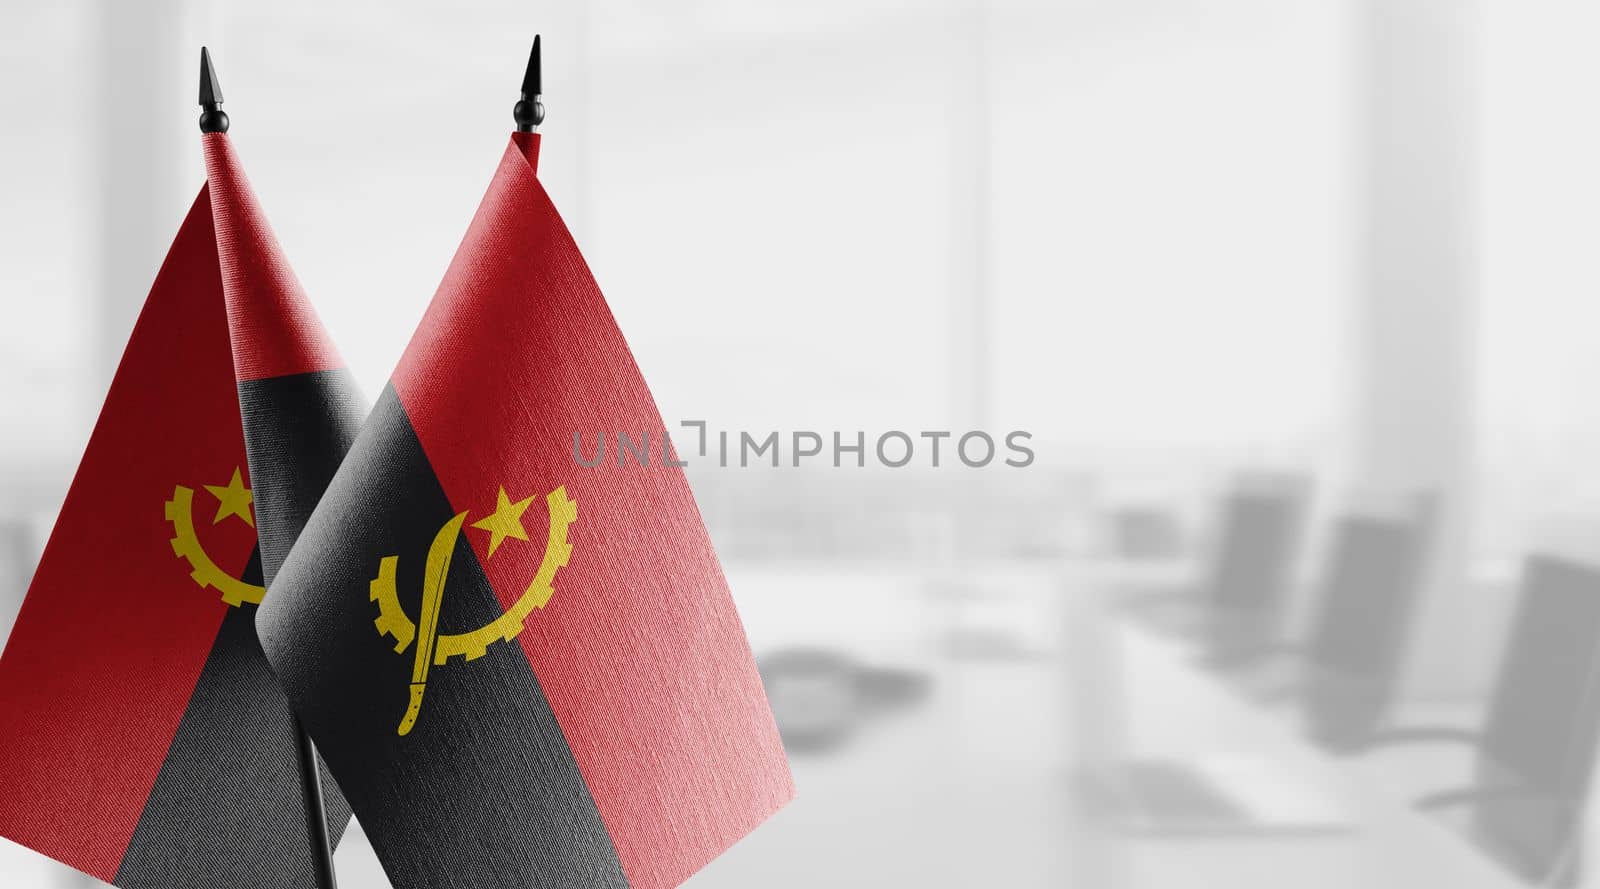 A small Angola flag on an abstract blurry background.